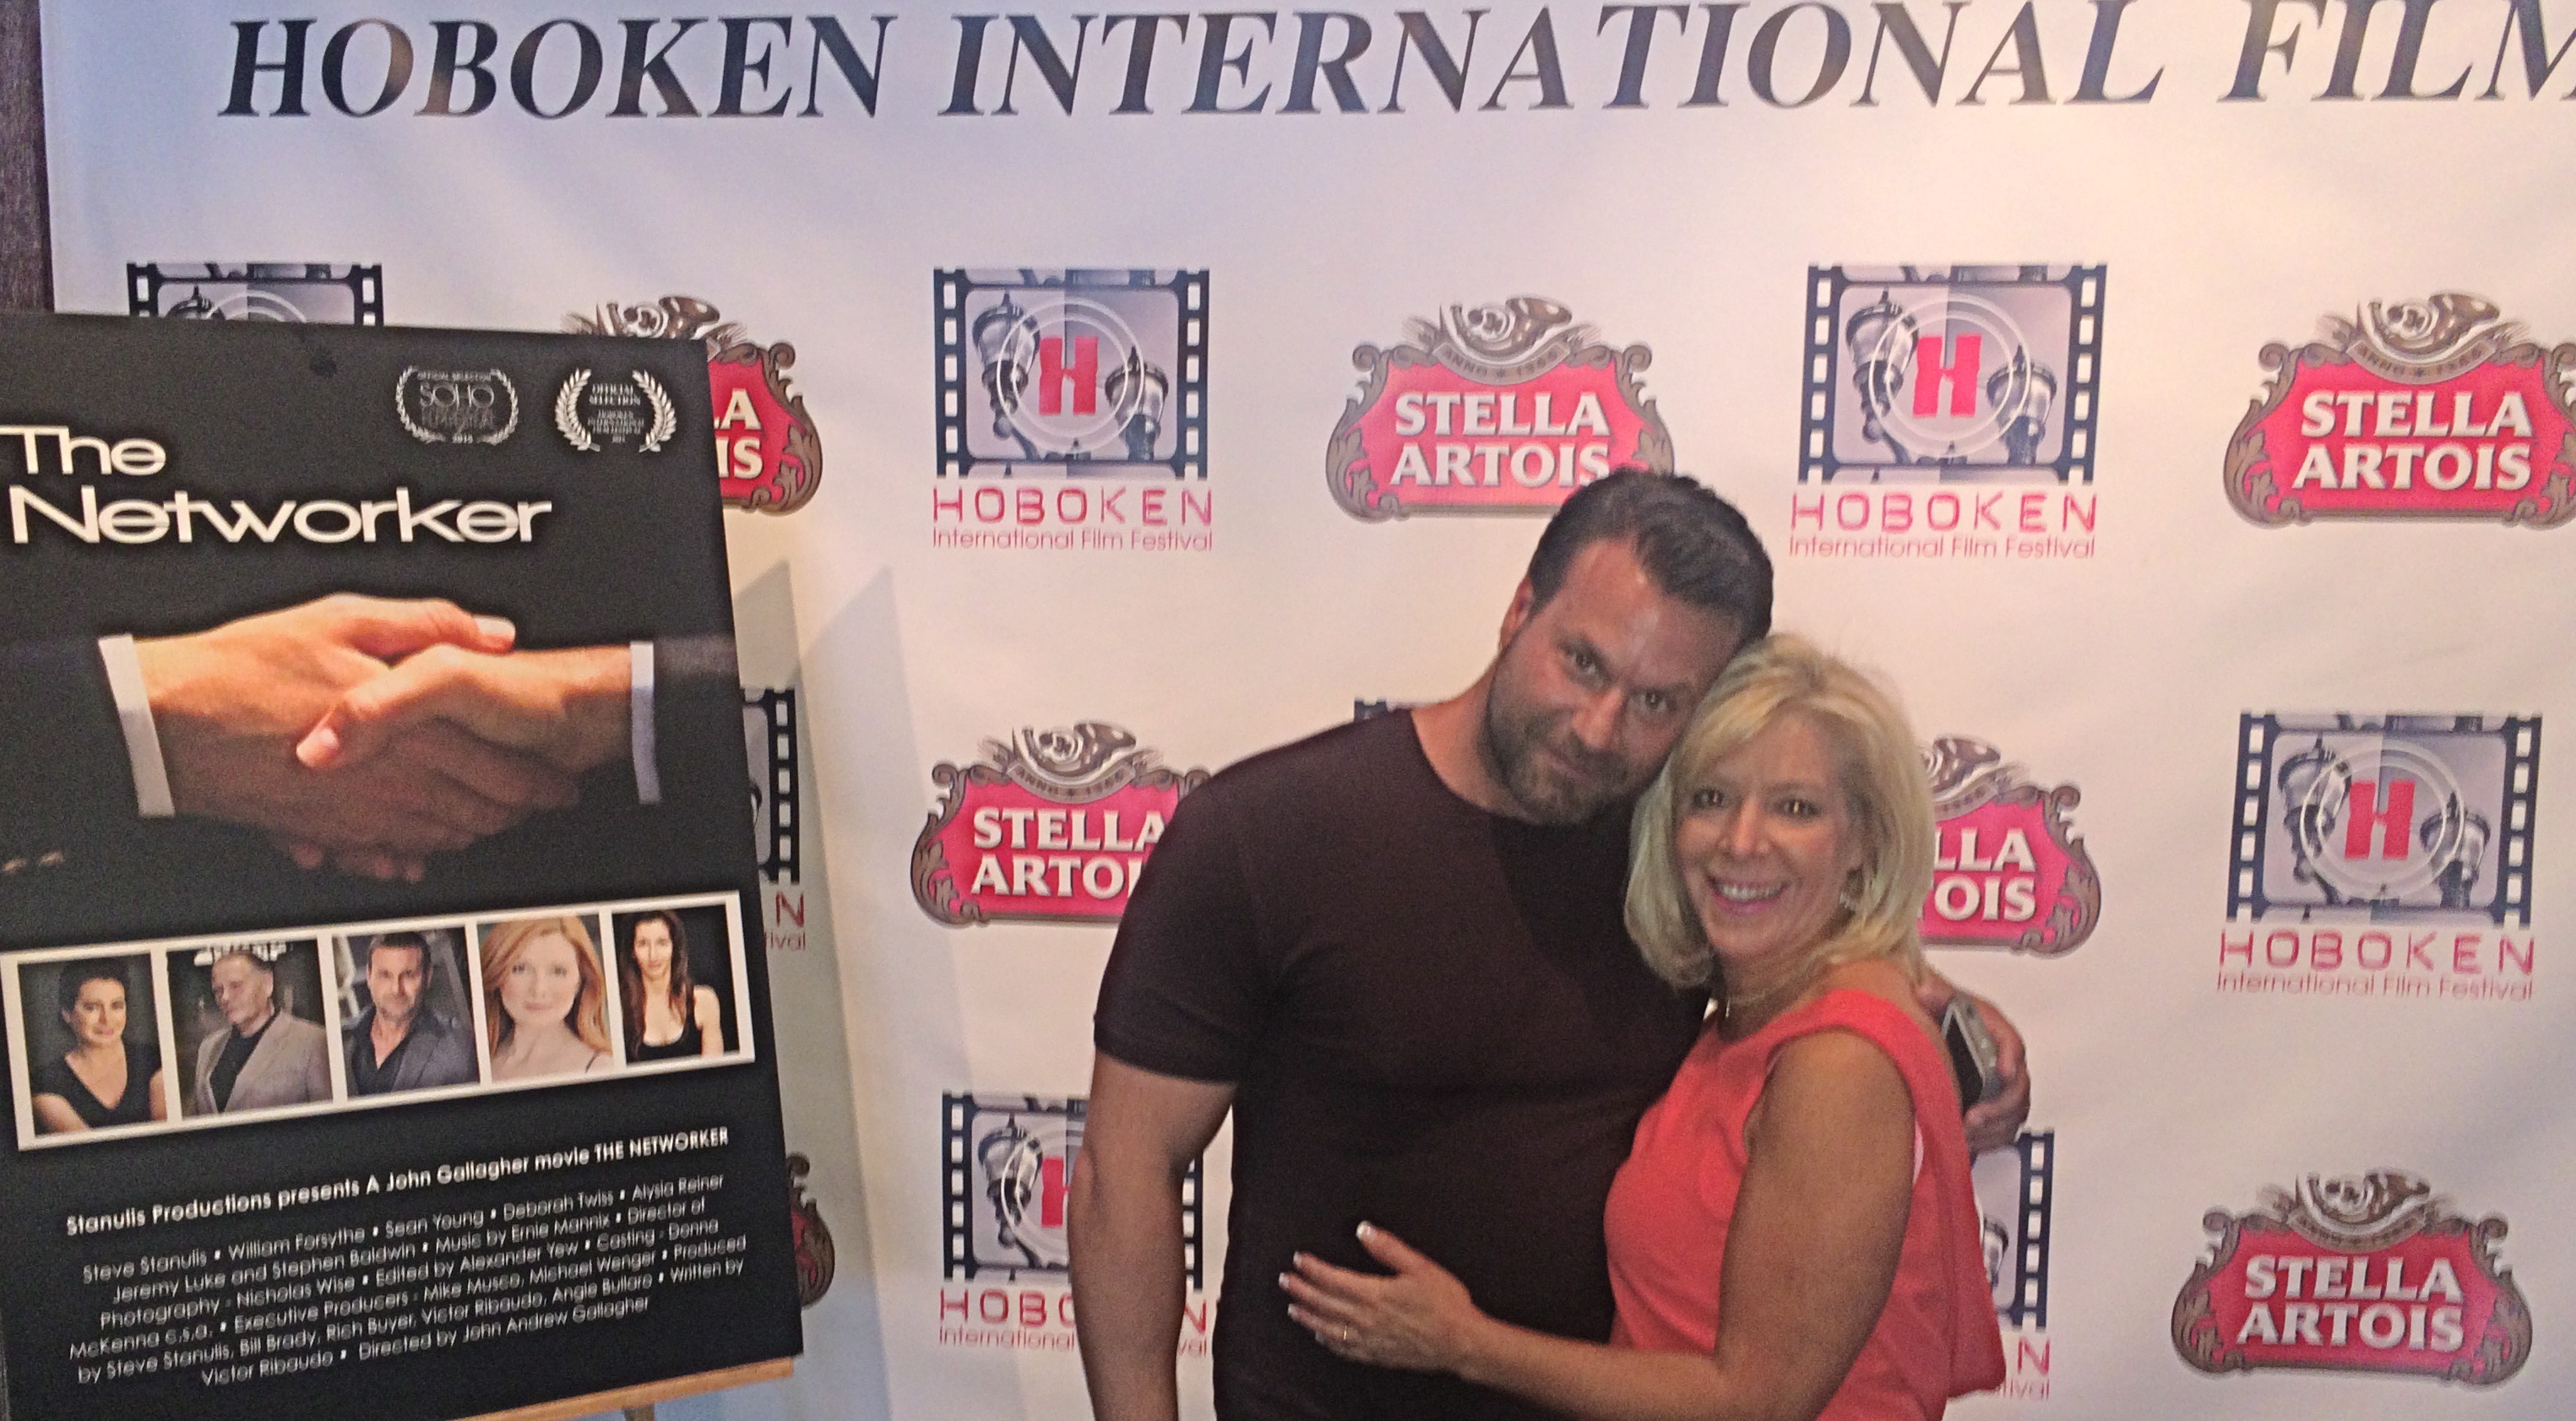 At the Hoboken International Film Festival for The Networker with producer/actor Steve Stanulis f